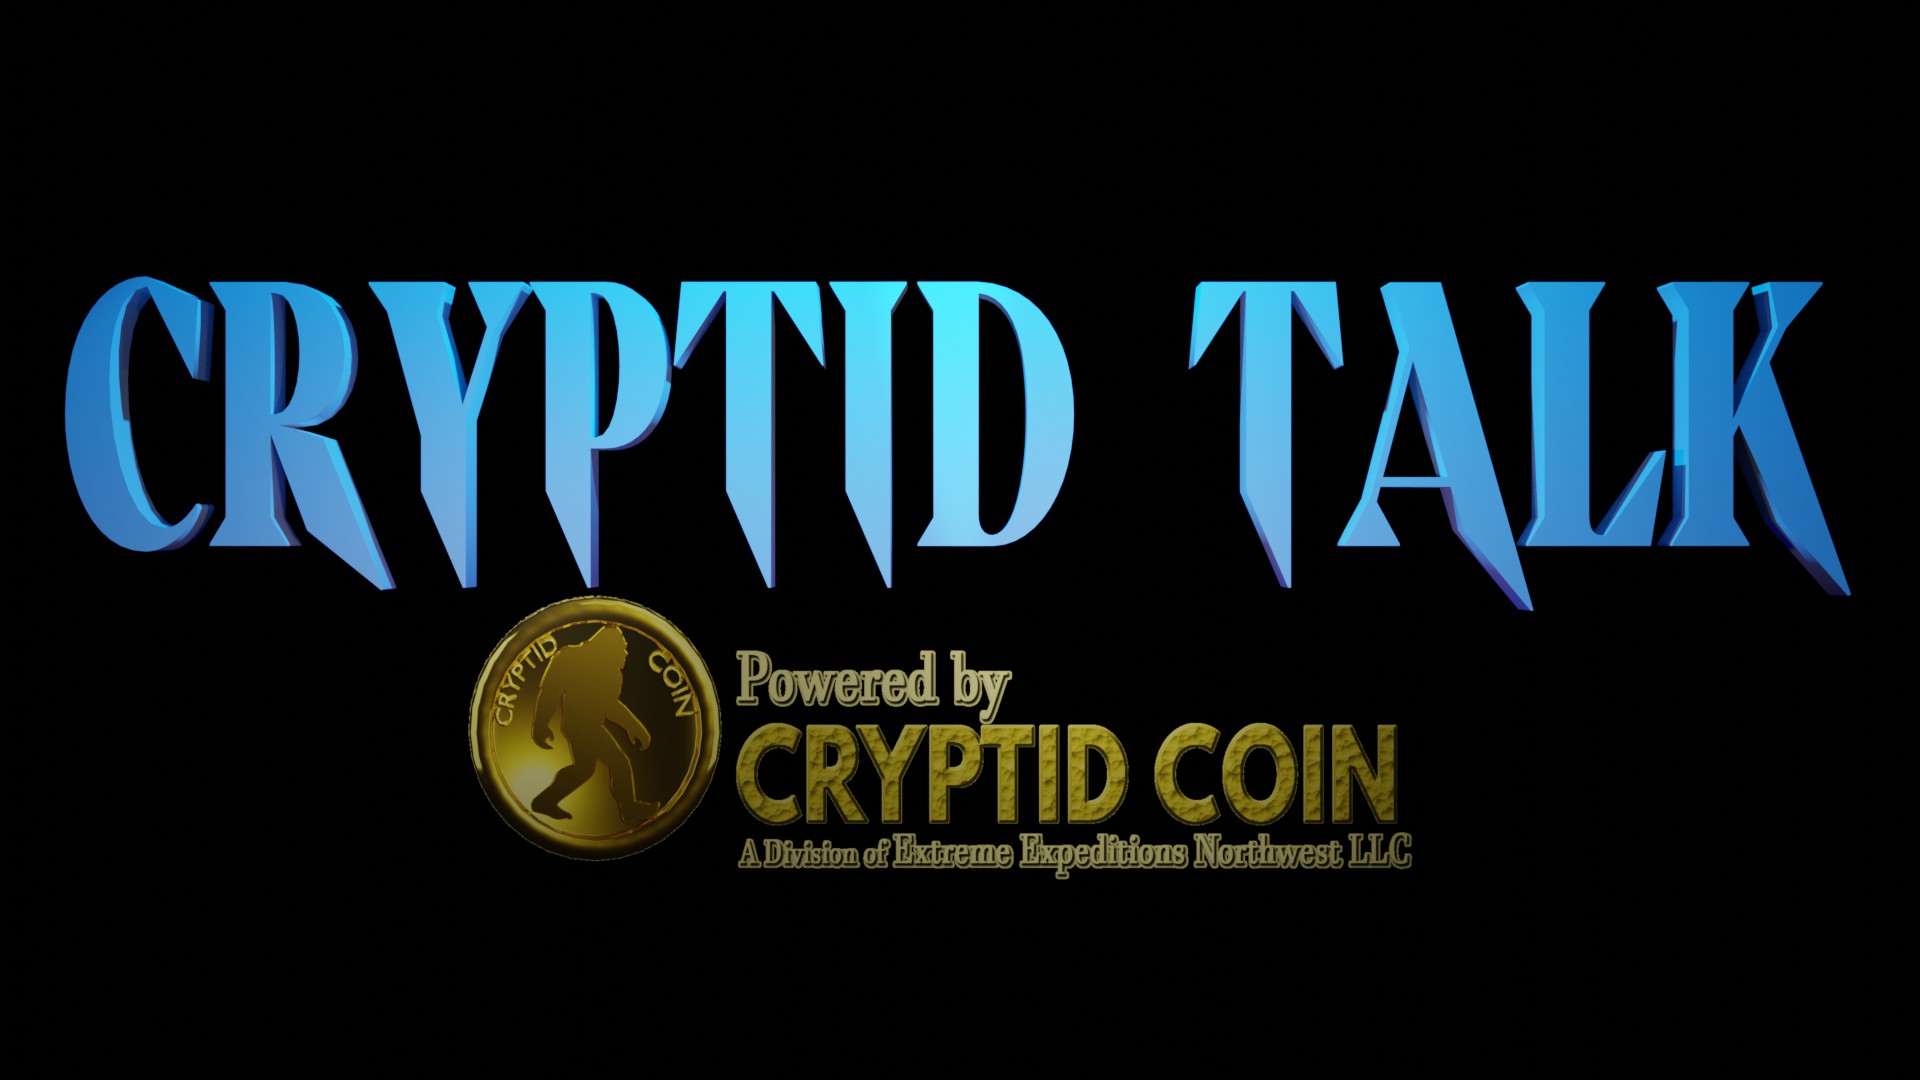 cryptid-talk-premiering-this-march-9th!-powered-by-cryptid-coin